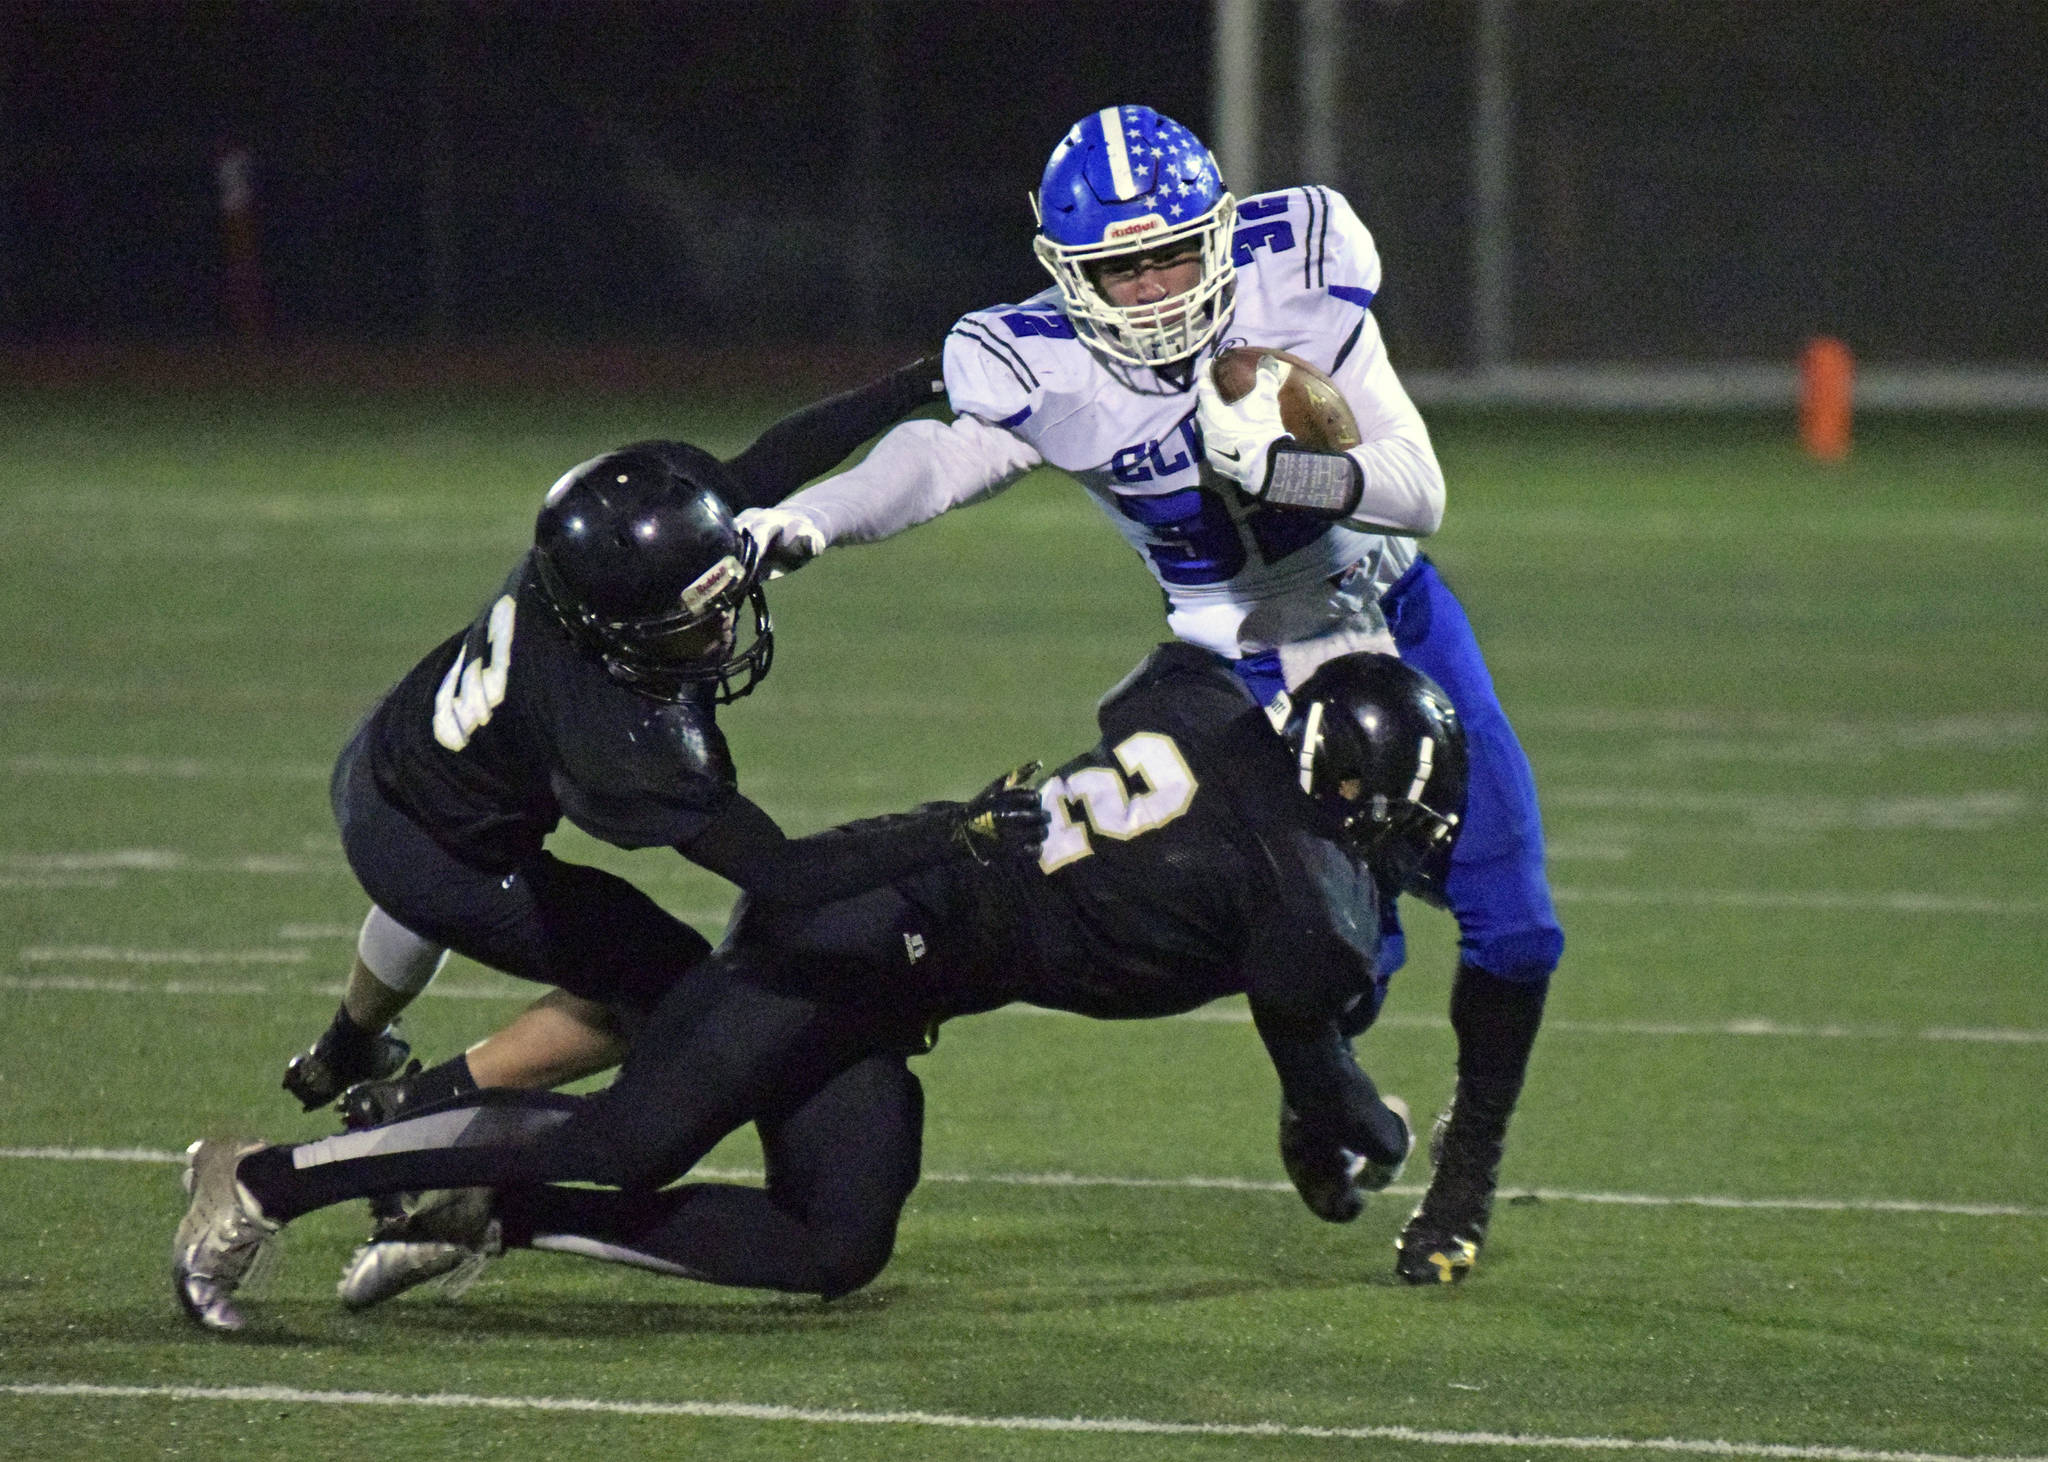 Elma’s Taitum Brumfield is tackled by Meridian’s Cameron Webster (2) during Saturday’s first-round state playoff game in Bellingham. (Eric Trent | Lynden Tribune)